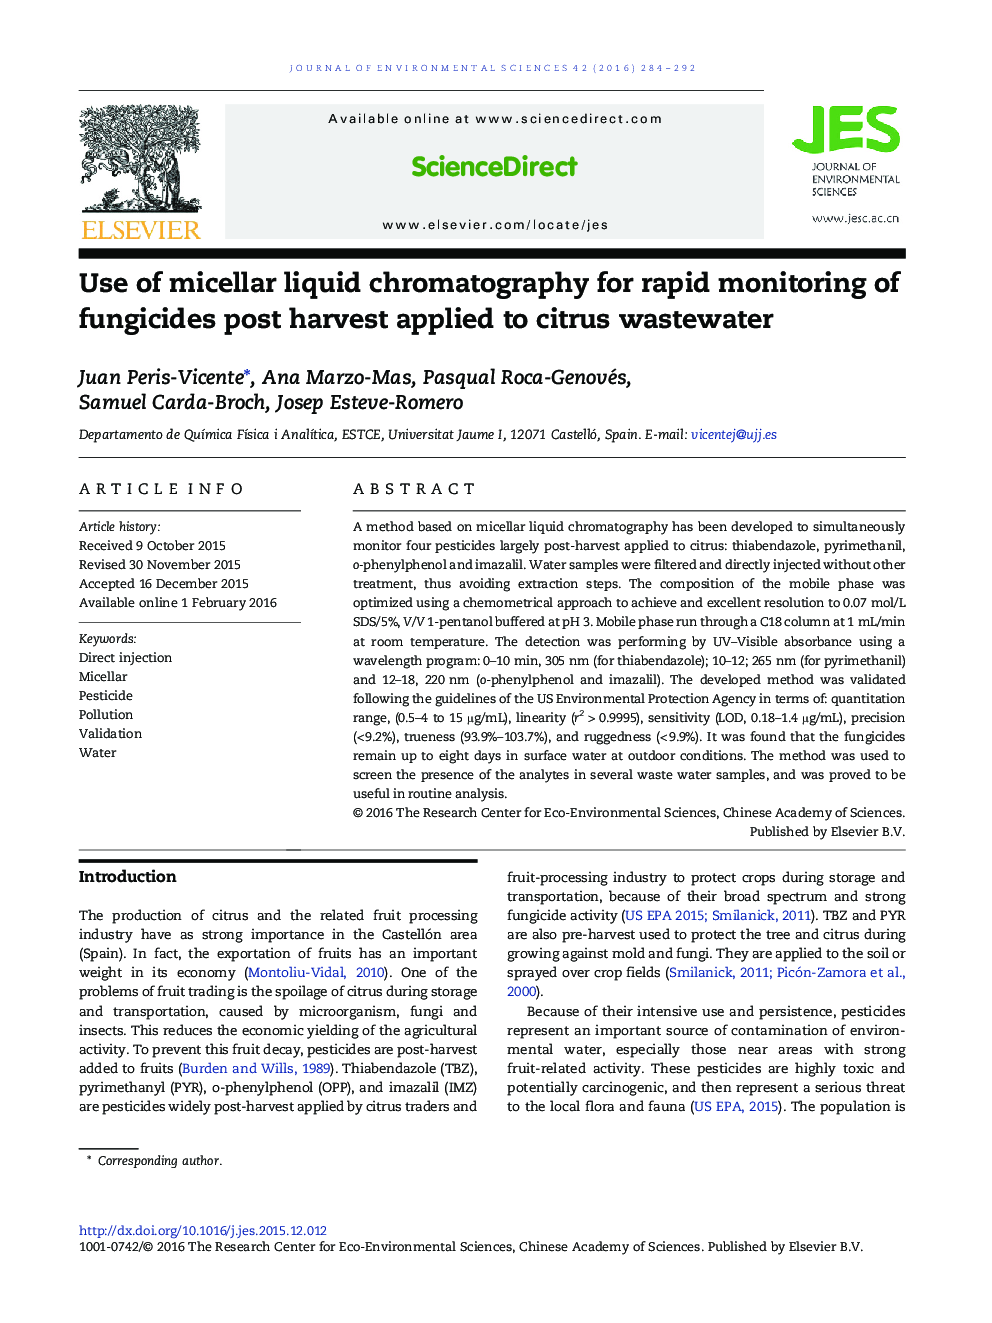 Use of micellar liquid chromatography for rapid monitoring of fungicides post harvest applied to citrus wastewater